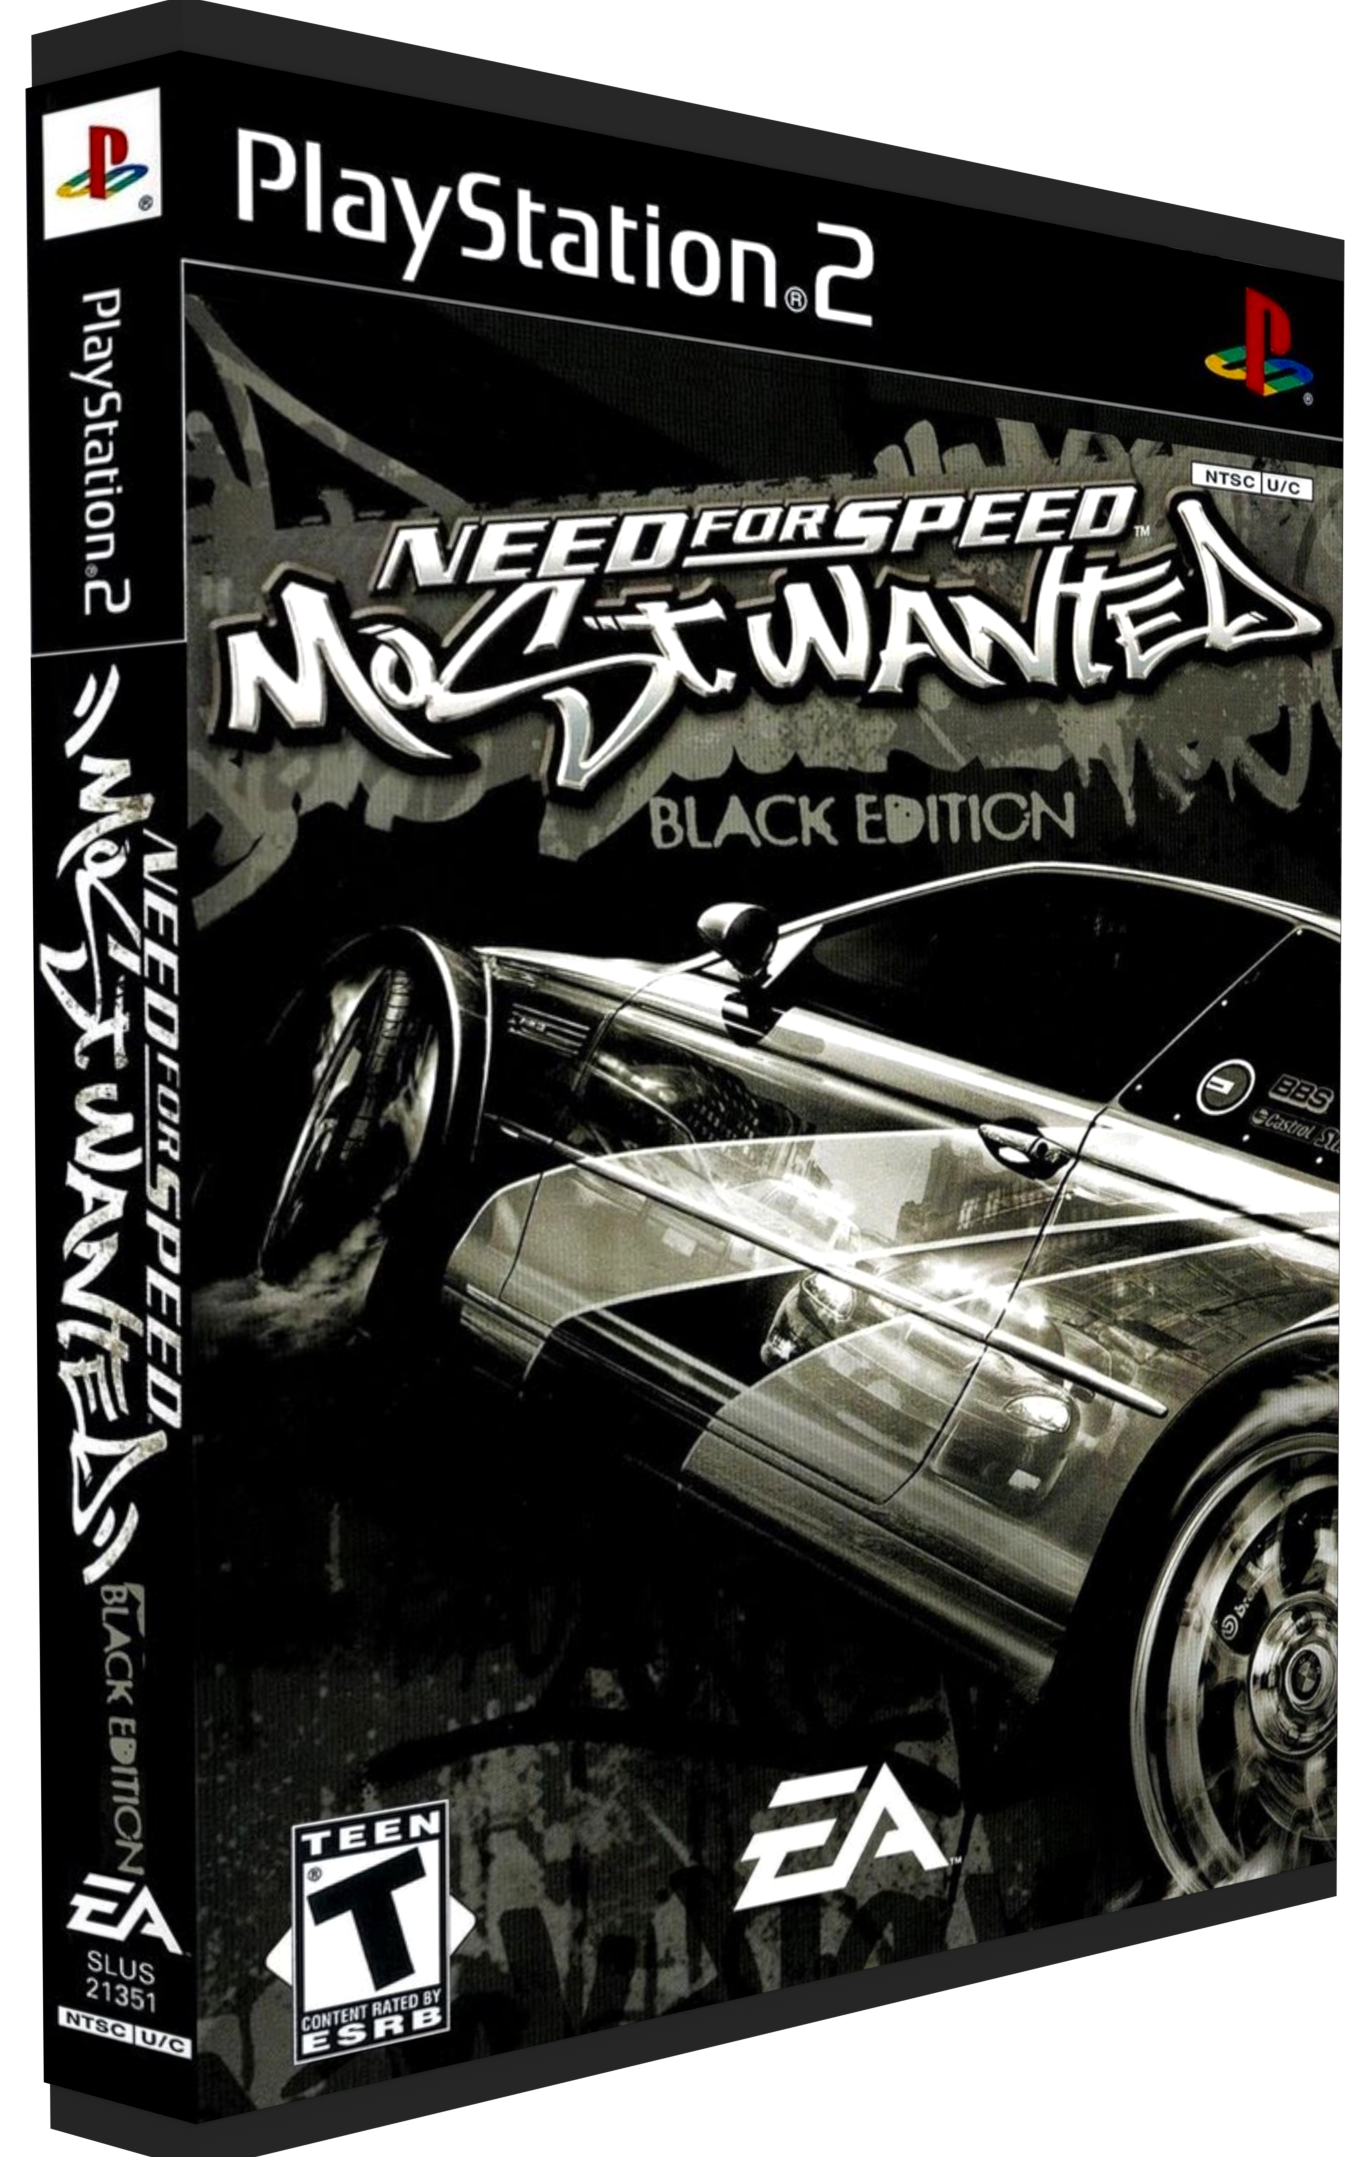 Need For Speed Most Wanted Black Edition Full Pc Game Free.html - Photos